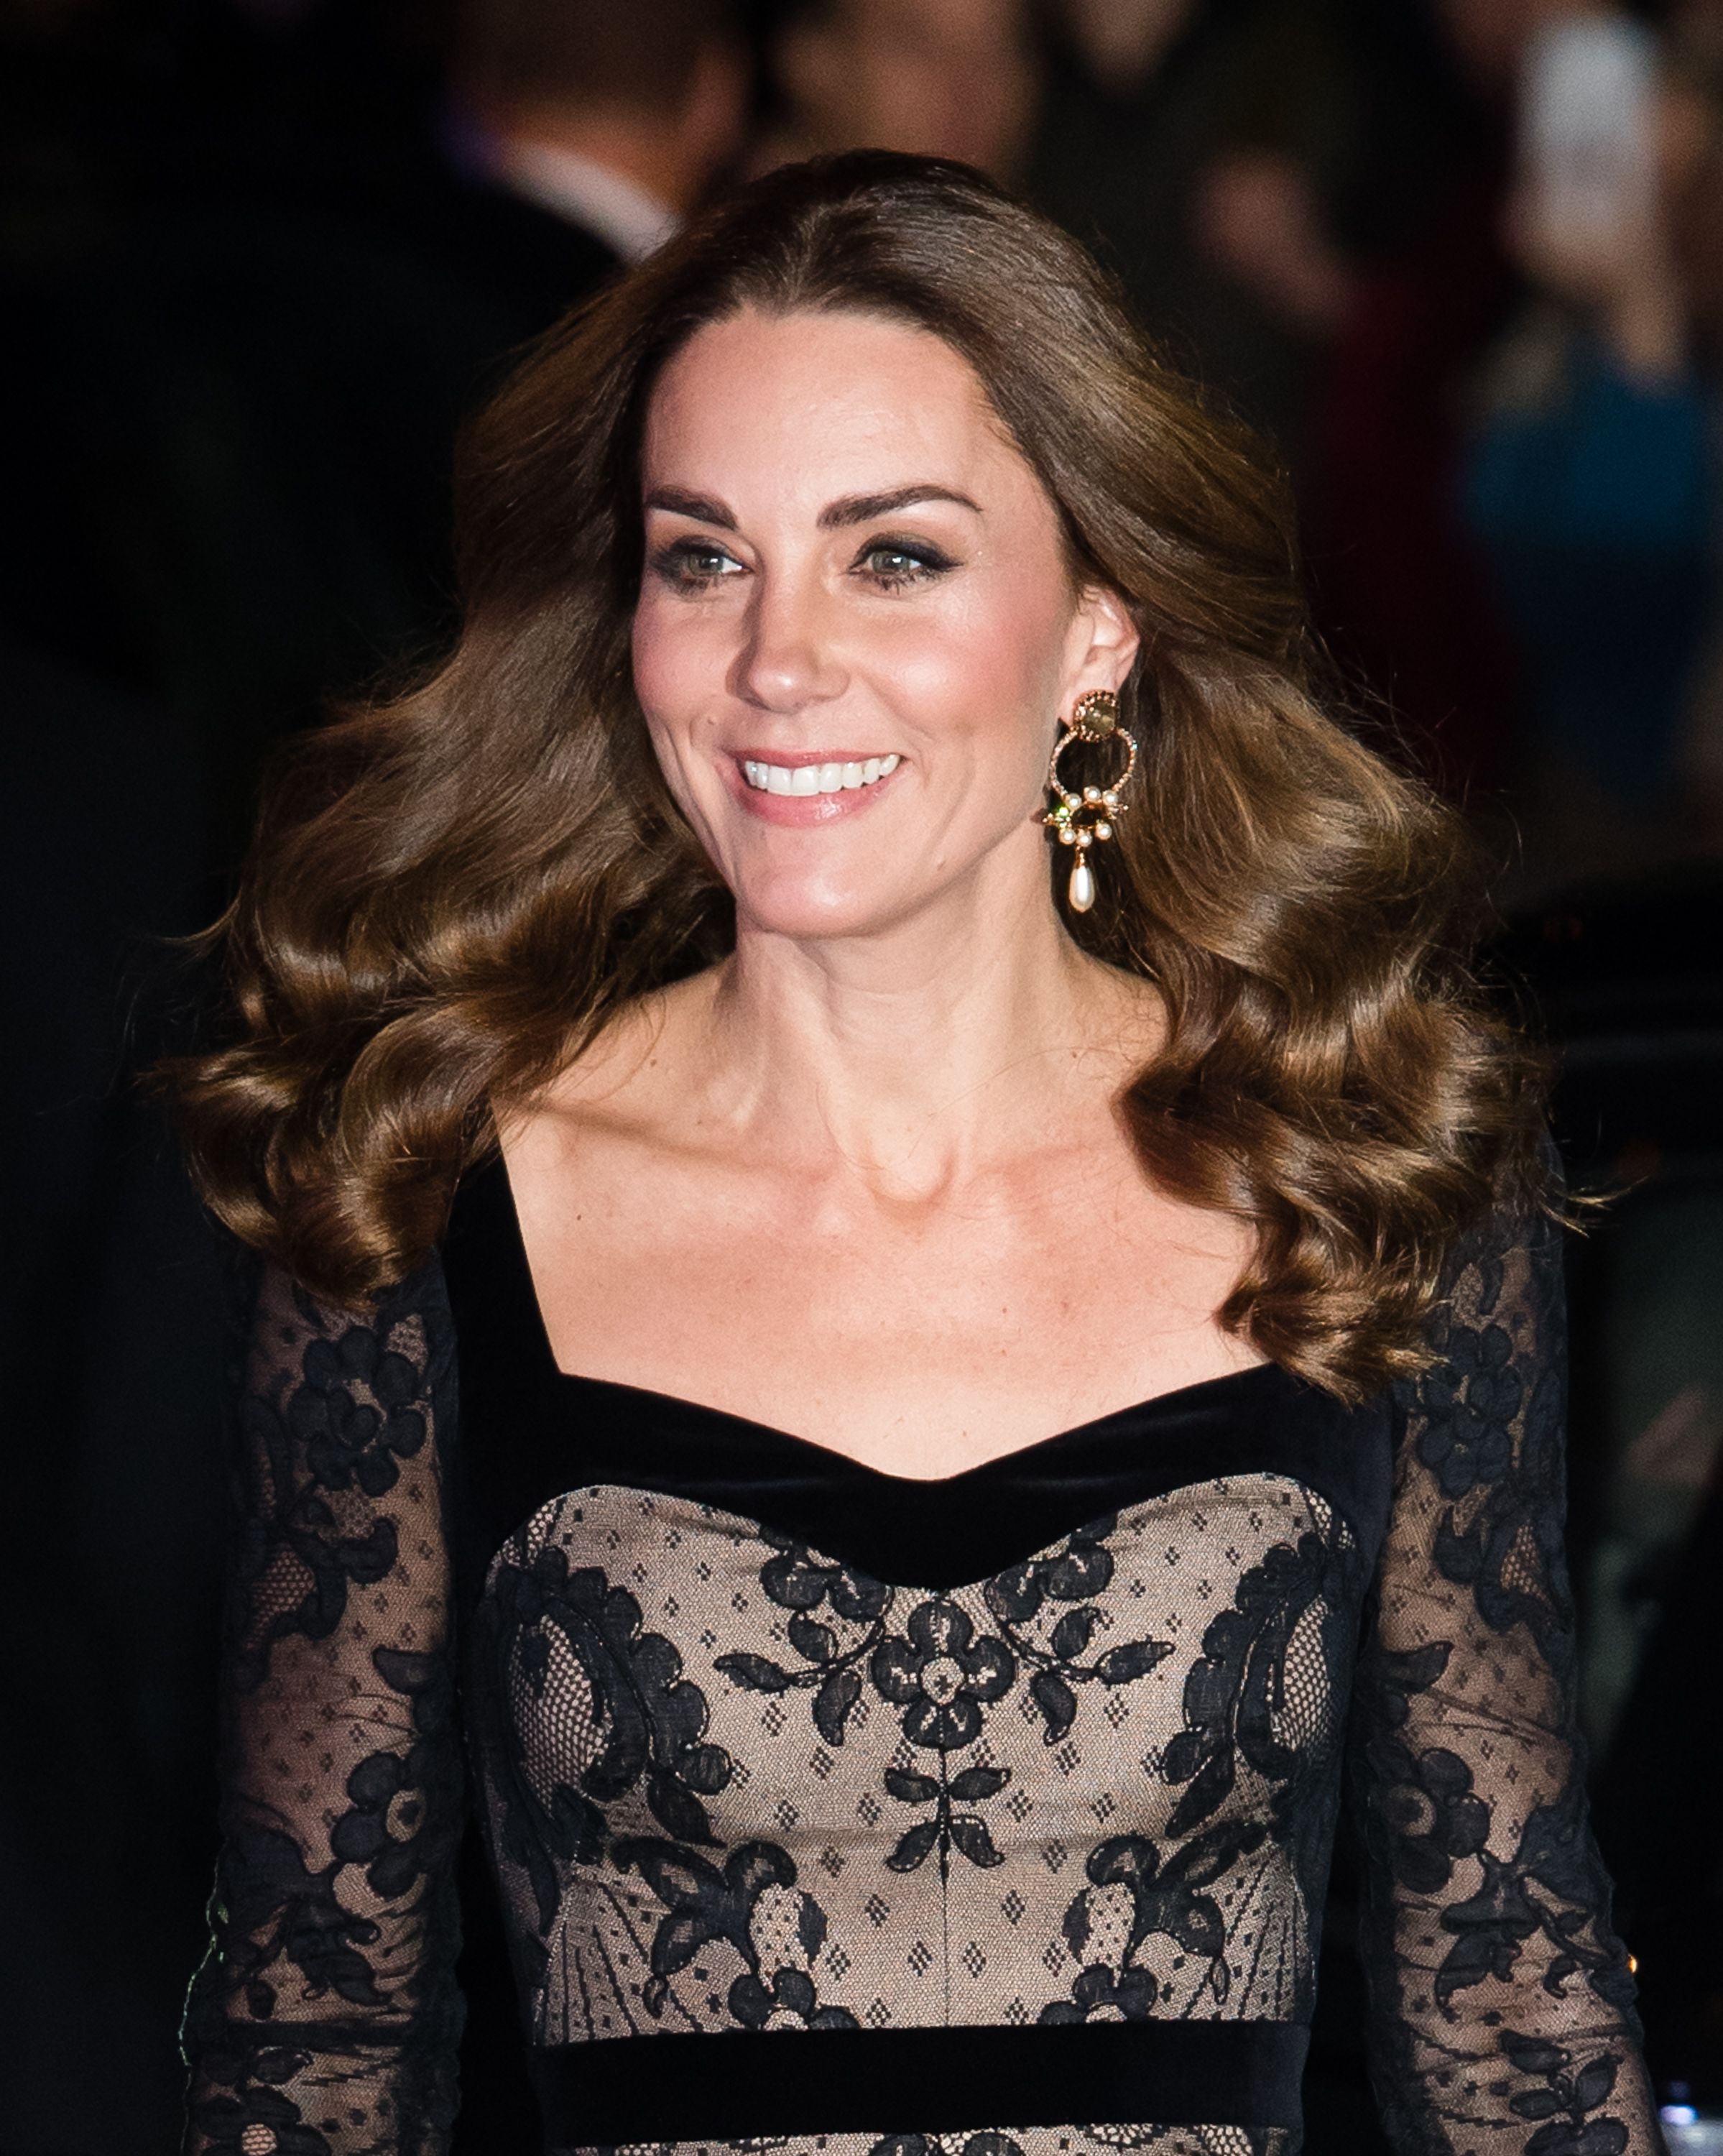 Kate Middleton Wears Black Lace Dress at the Royal Variety Performance